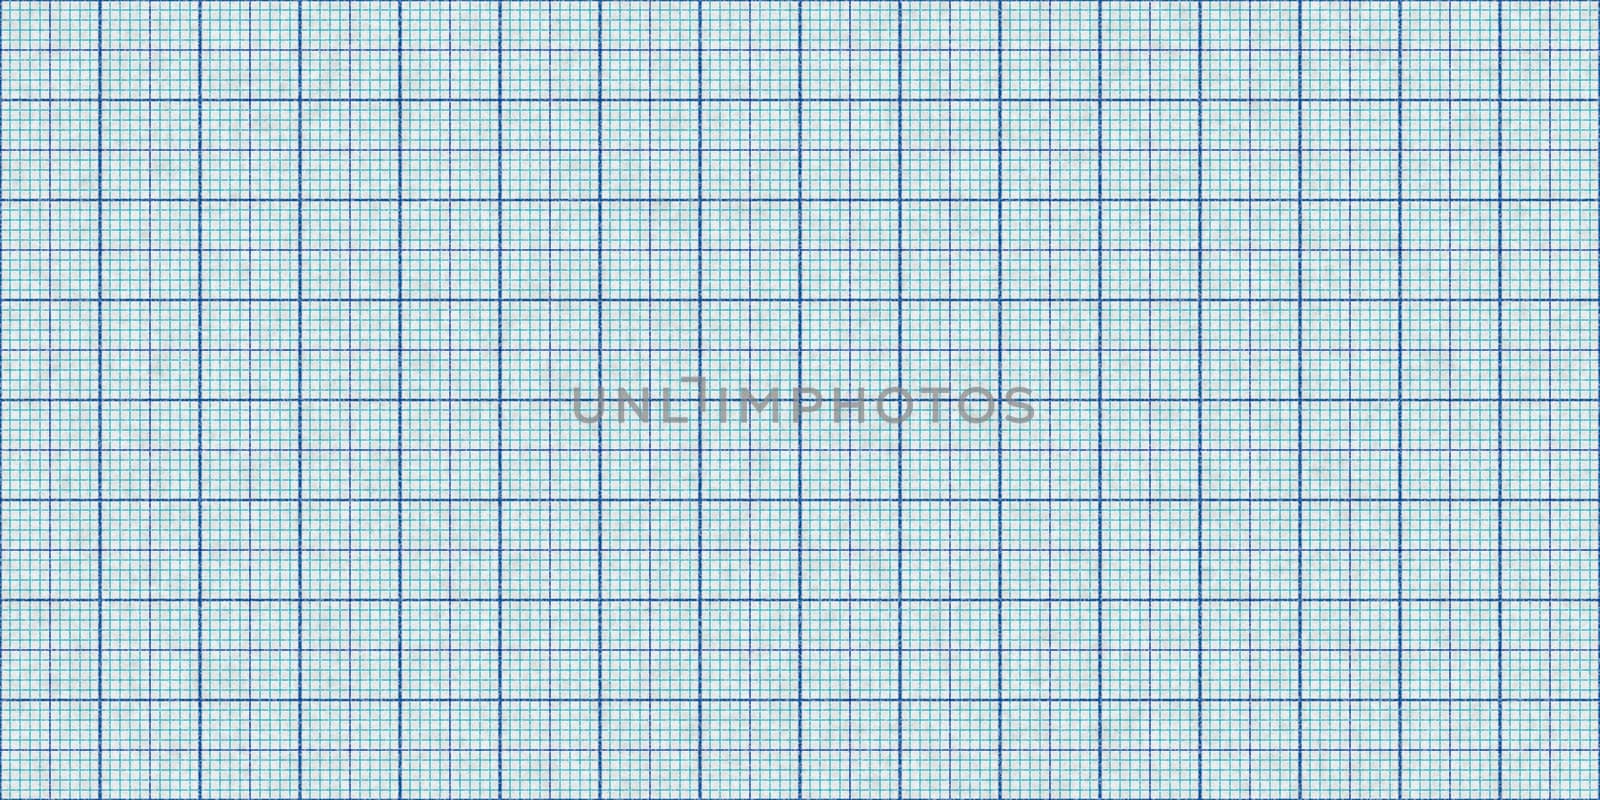 Sky Blue Seamless Millimeter Paper Background. Tiling Graph Grid Texture. Empty Lined Pattern.